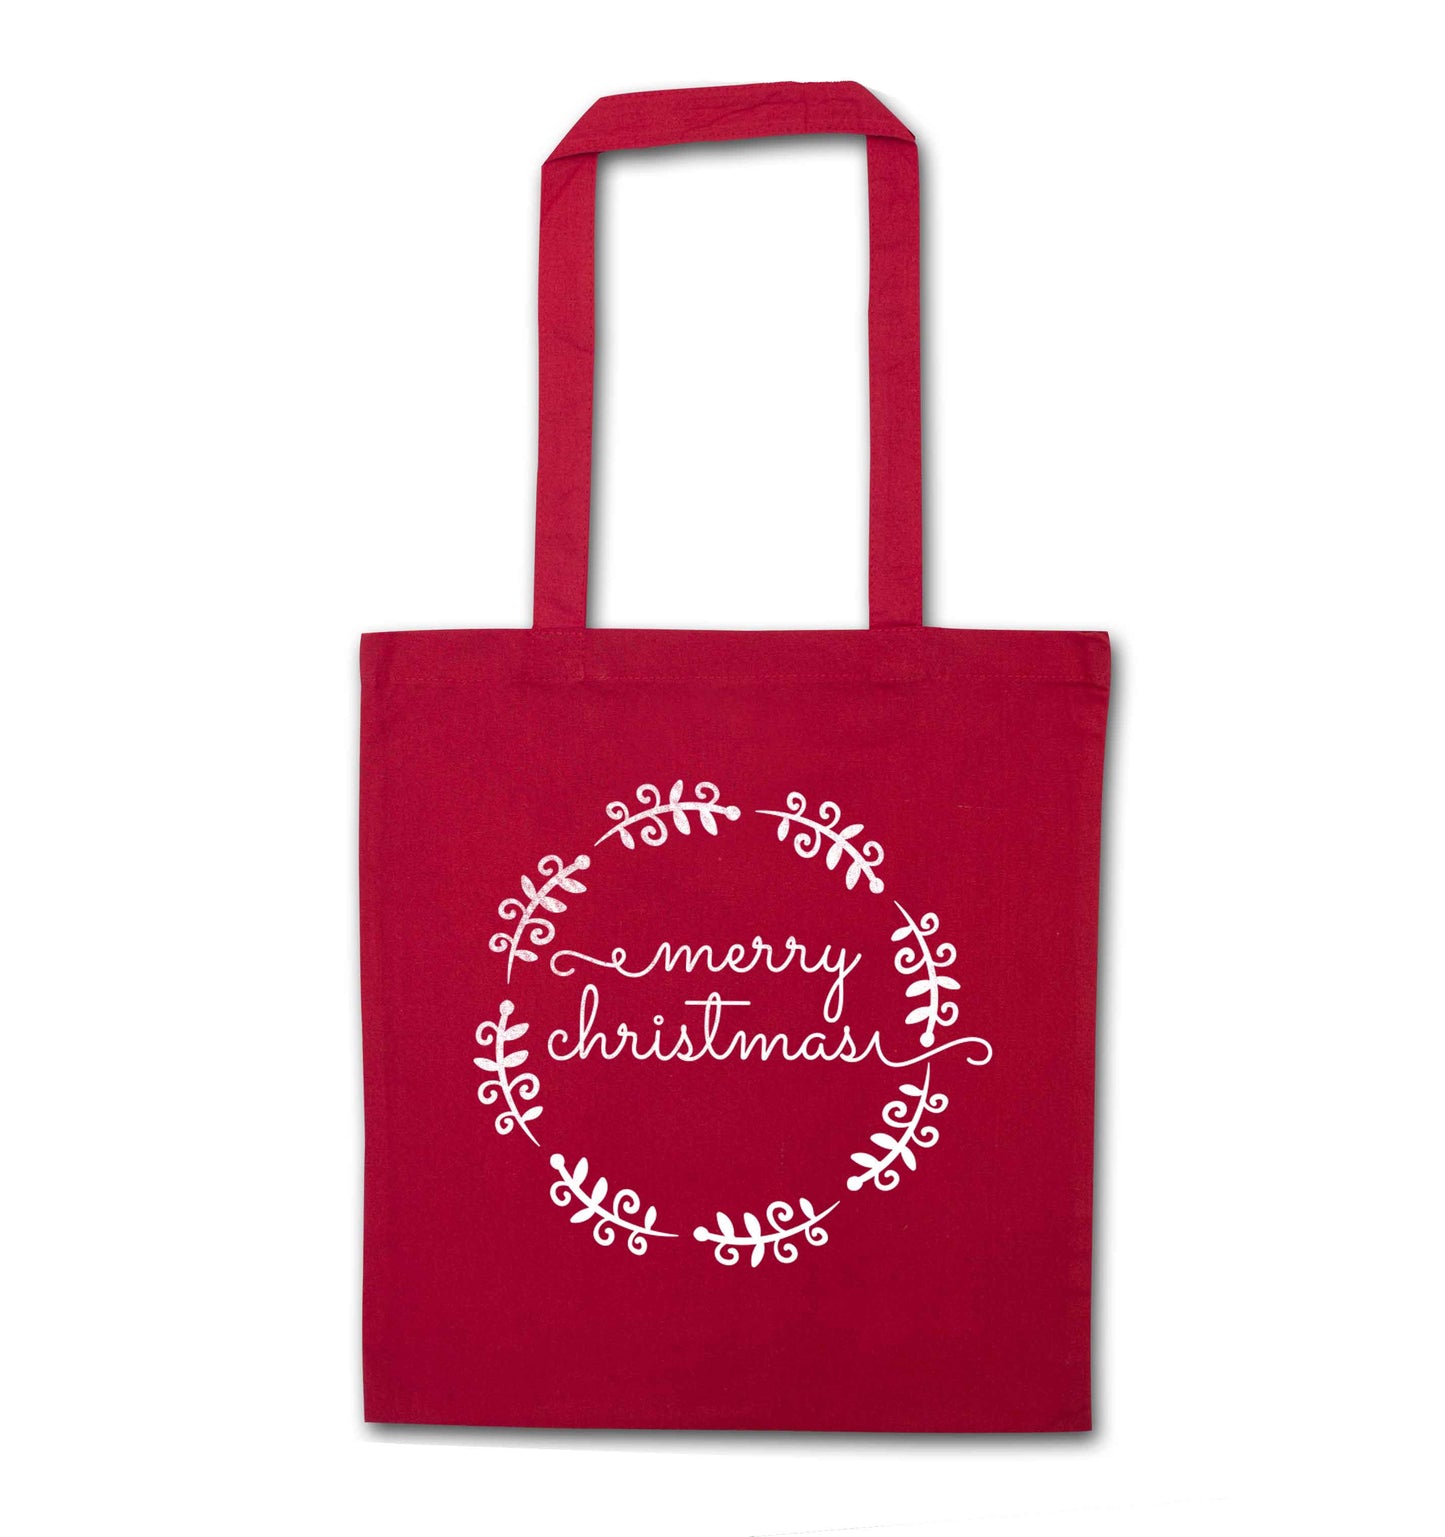 Merry christmas red tote bag